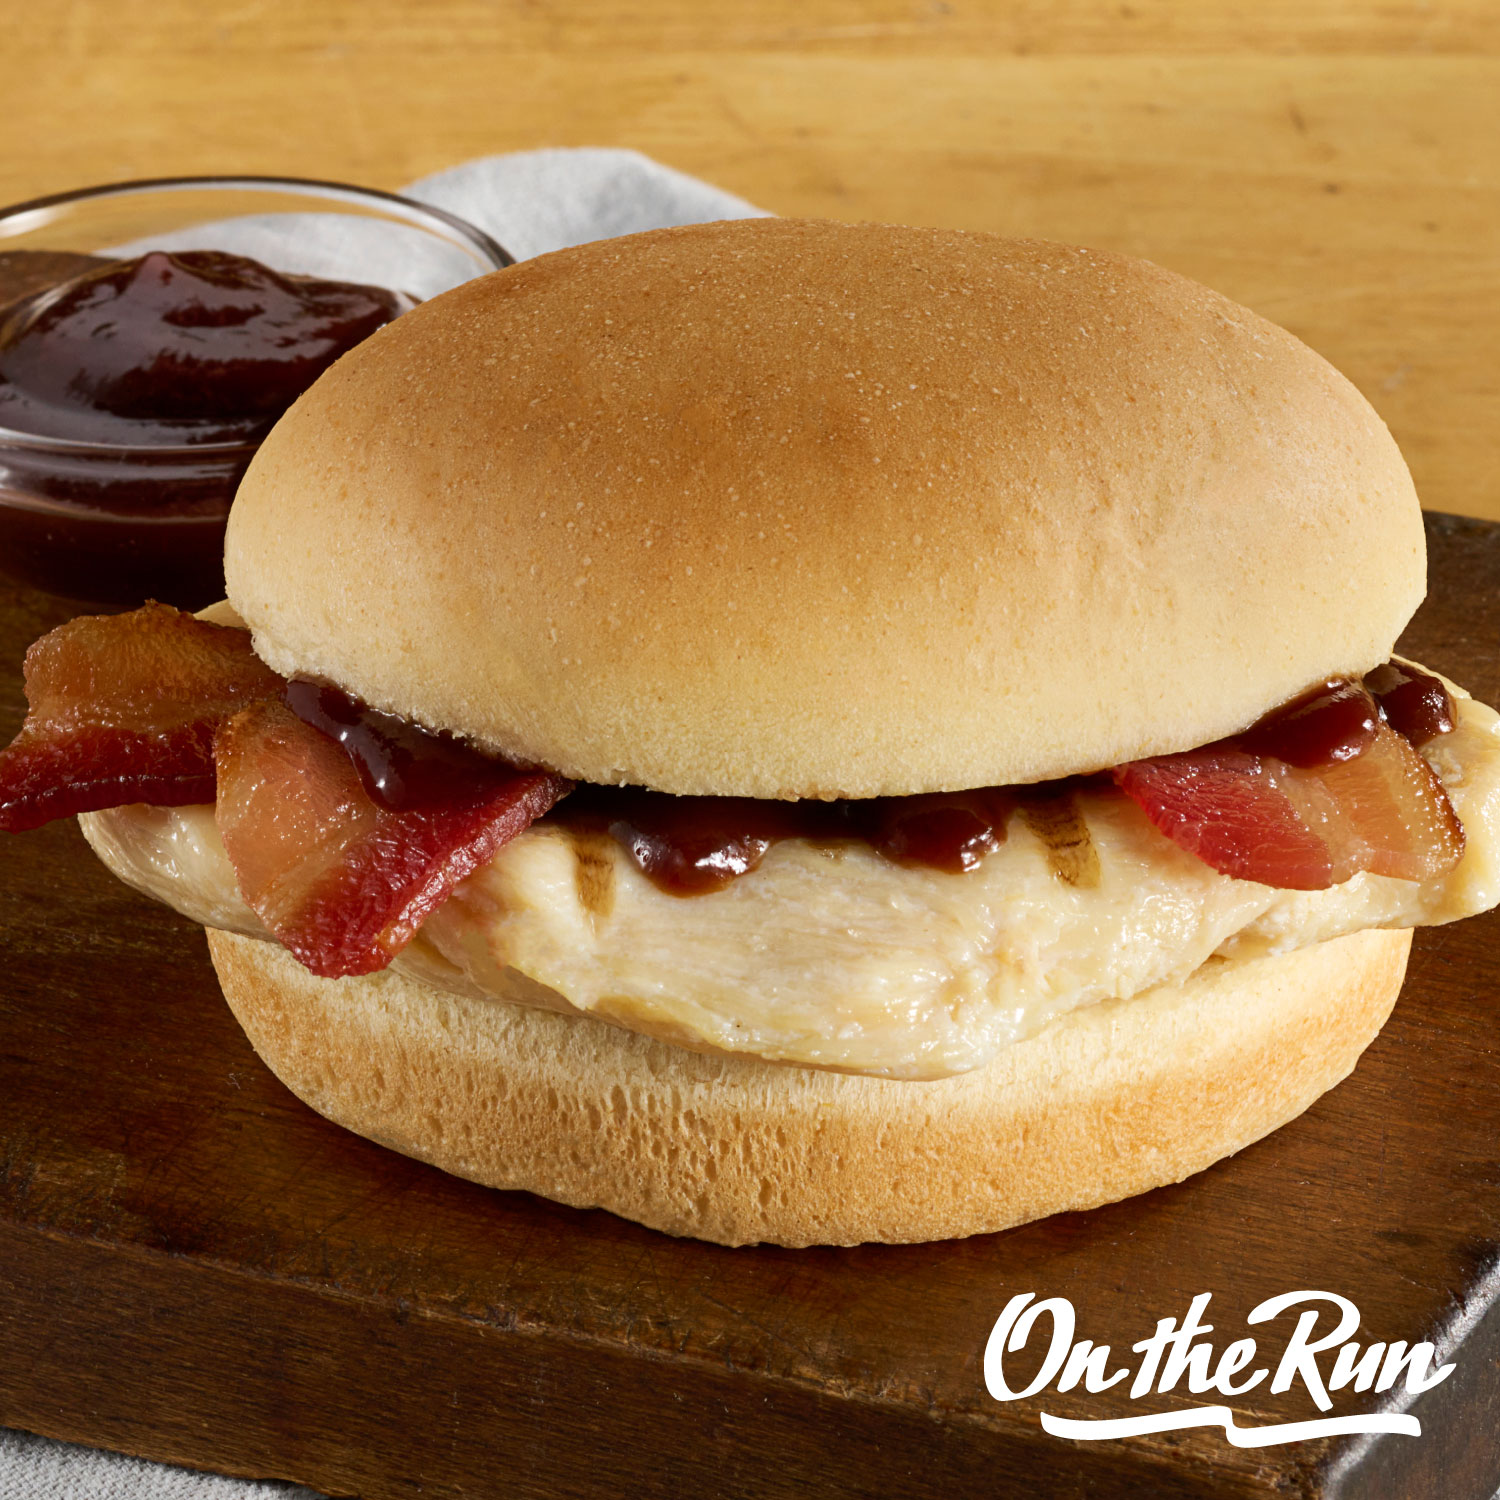 try our BBQ Chicken with Bacon Sandwich limited time offer